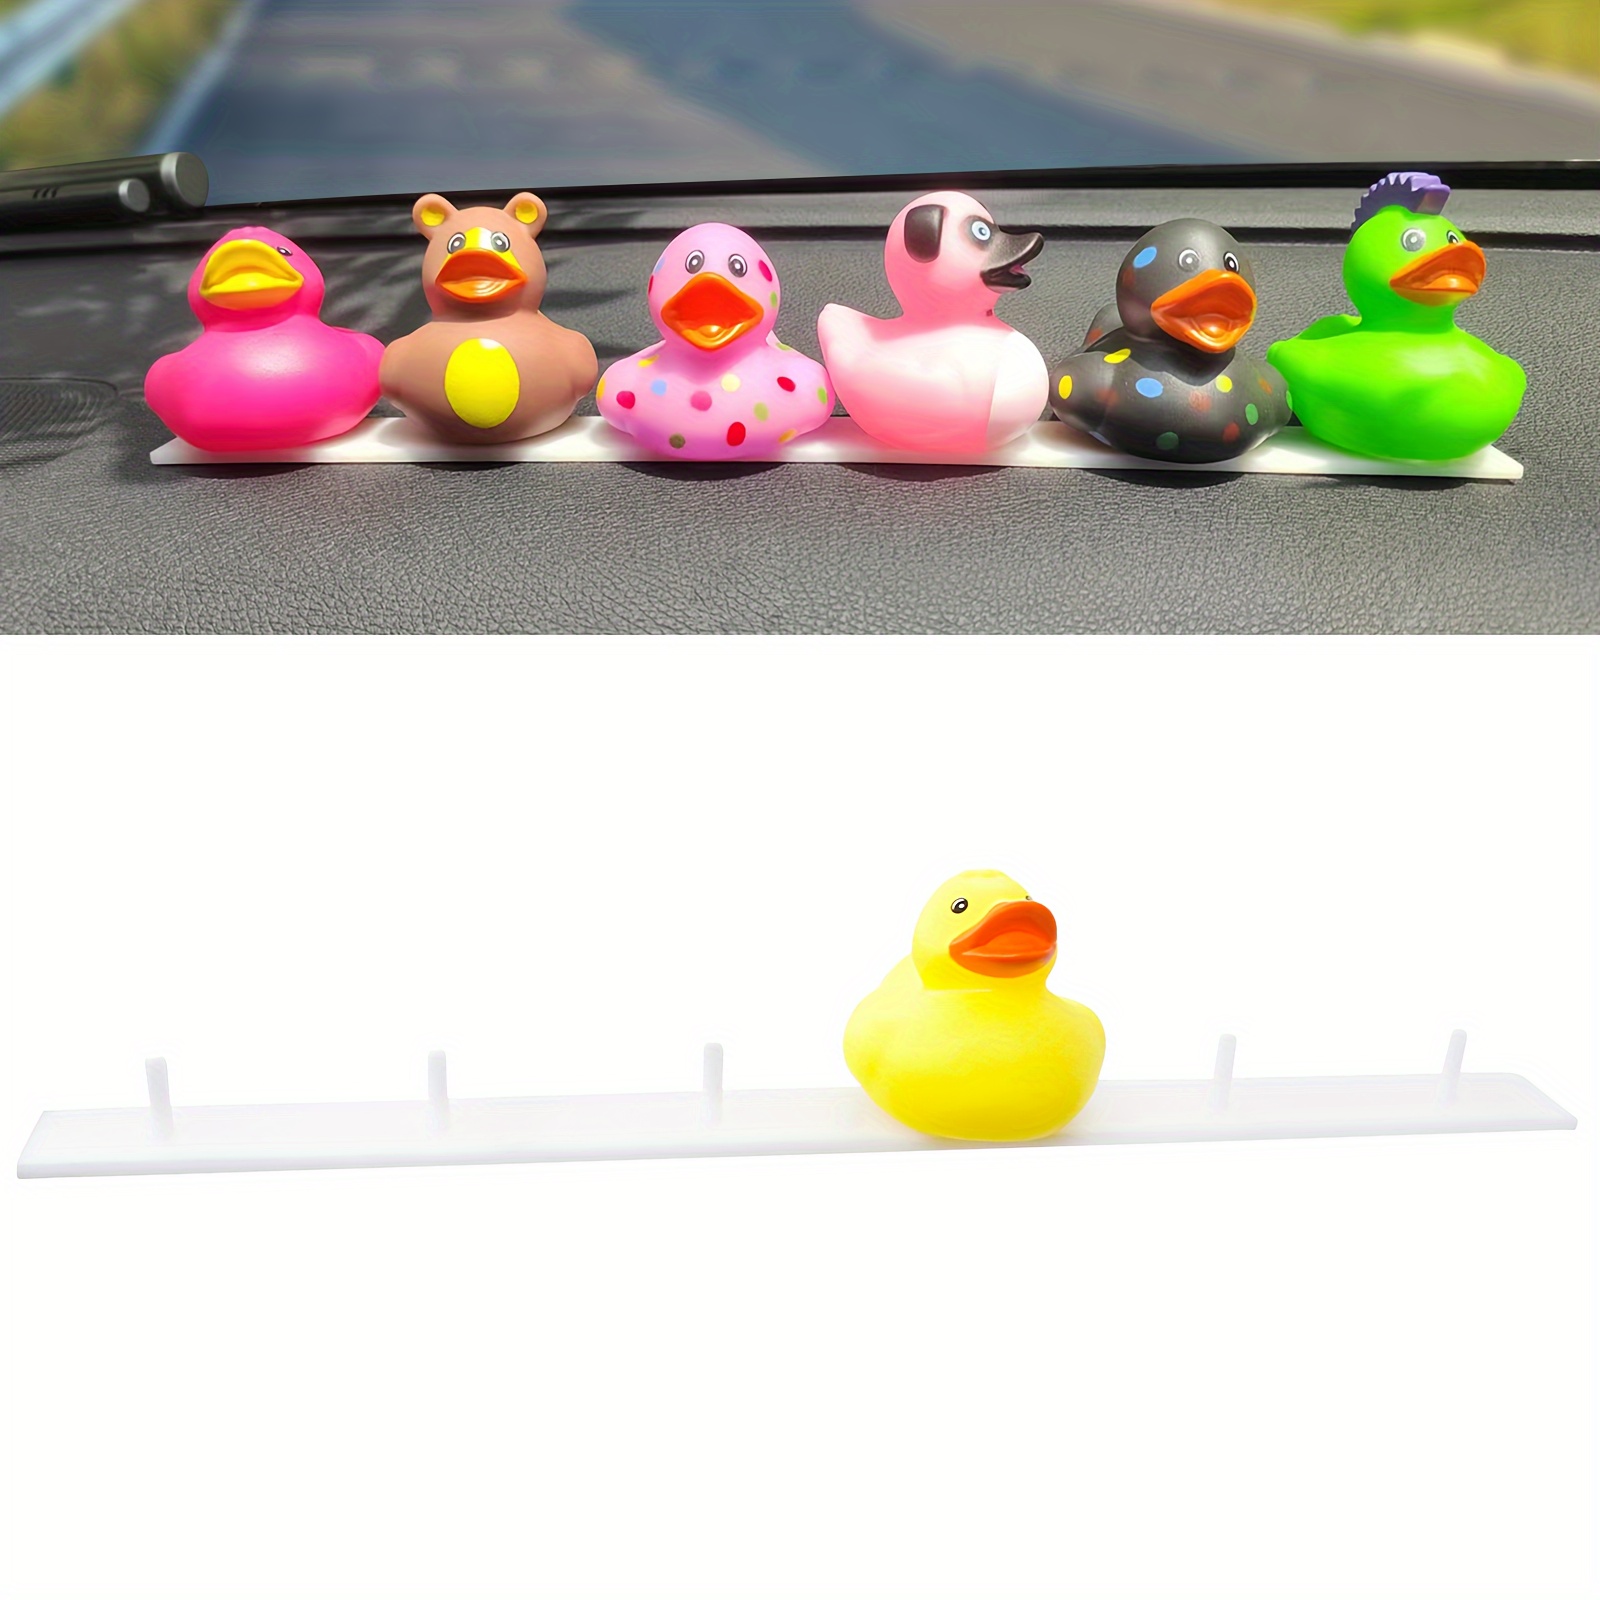 

1 Duck Holder For Jeep Dashboard With Rubber And Plastic Duck Plugs, Disposable Capable Of Holding Up To 6 Ducks, Ideal For Displaying Jeep-themed Gifts (does Not Include Rubber Duck)